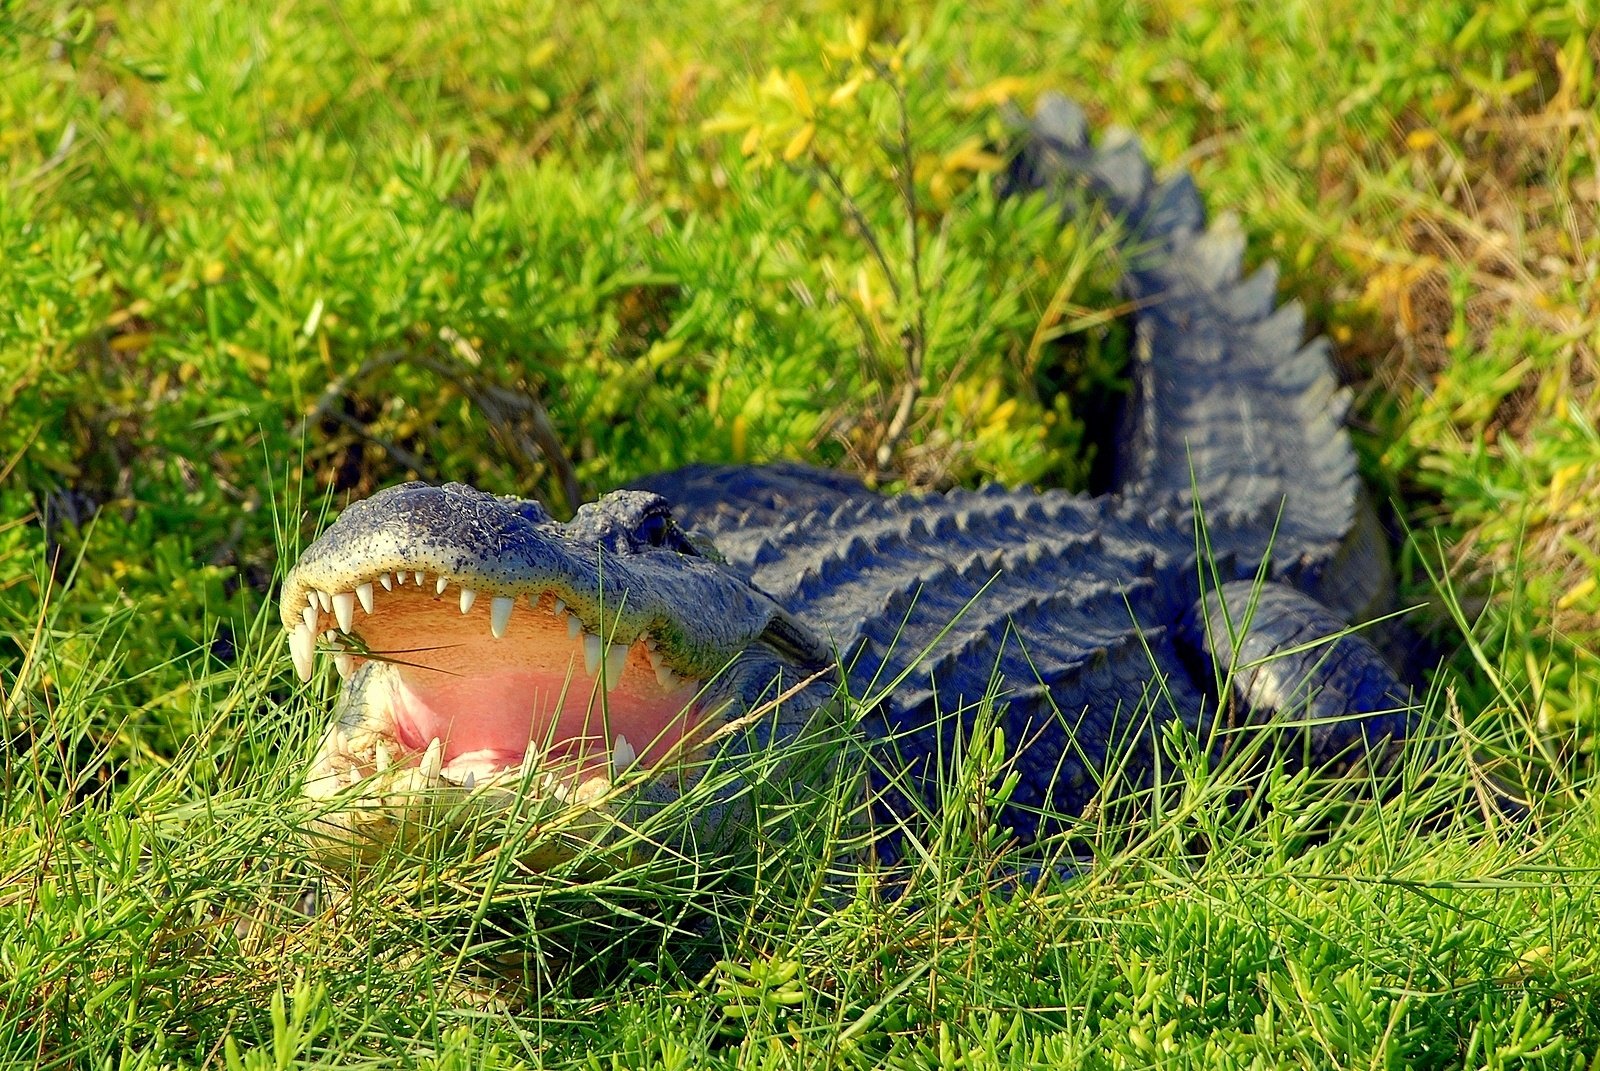 What in the world is a caiman, and how does it relate to an alligator or  crocodile?